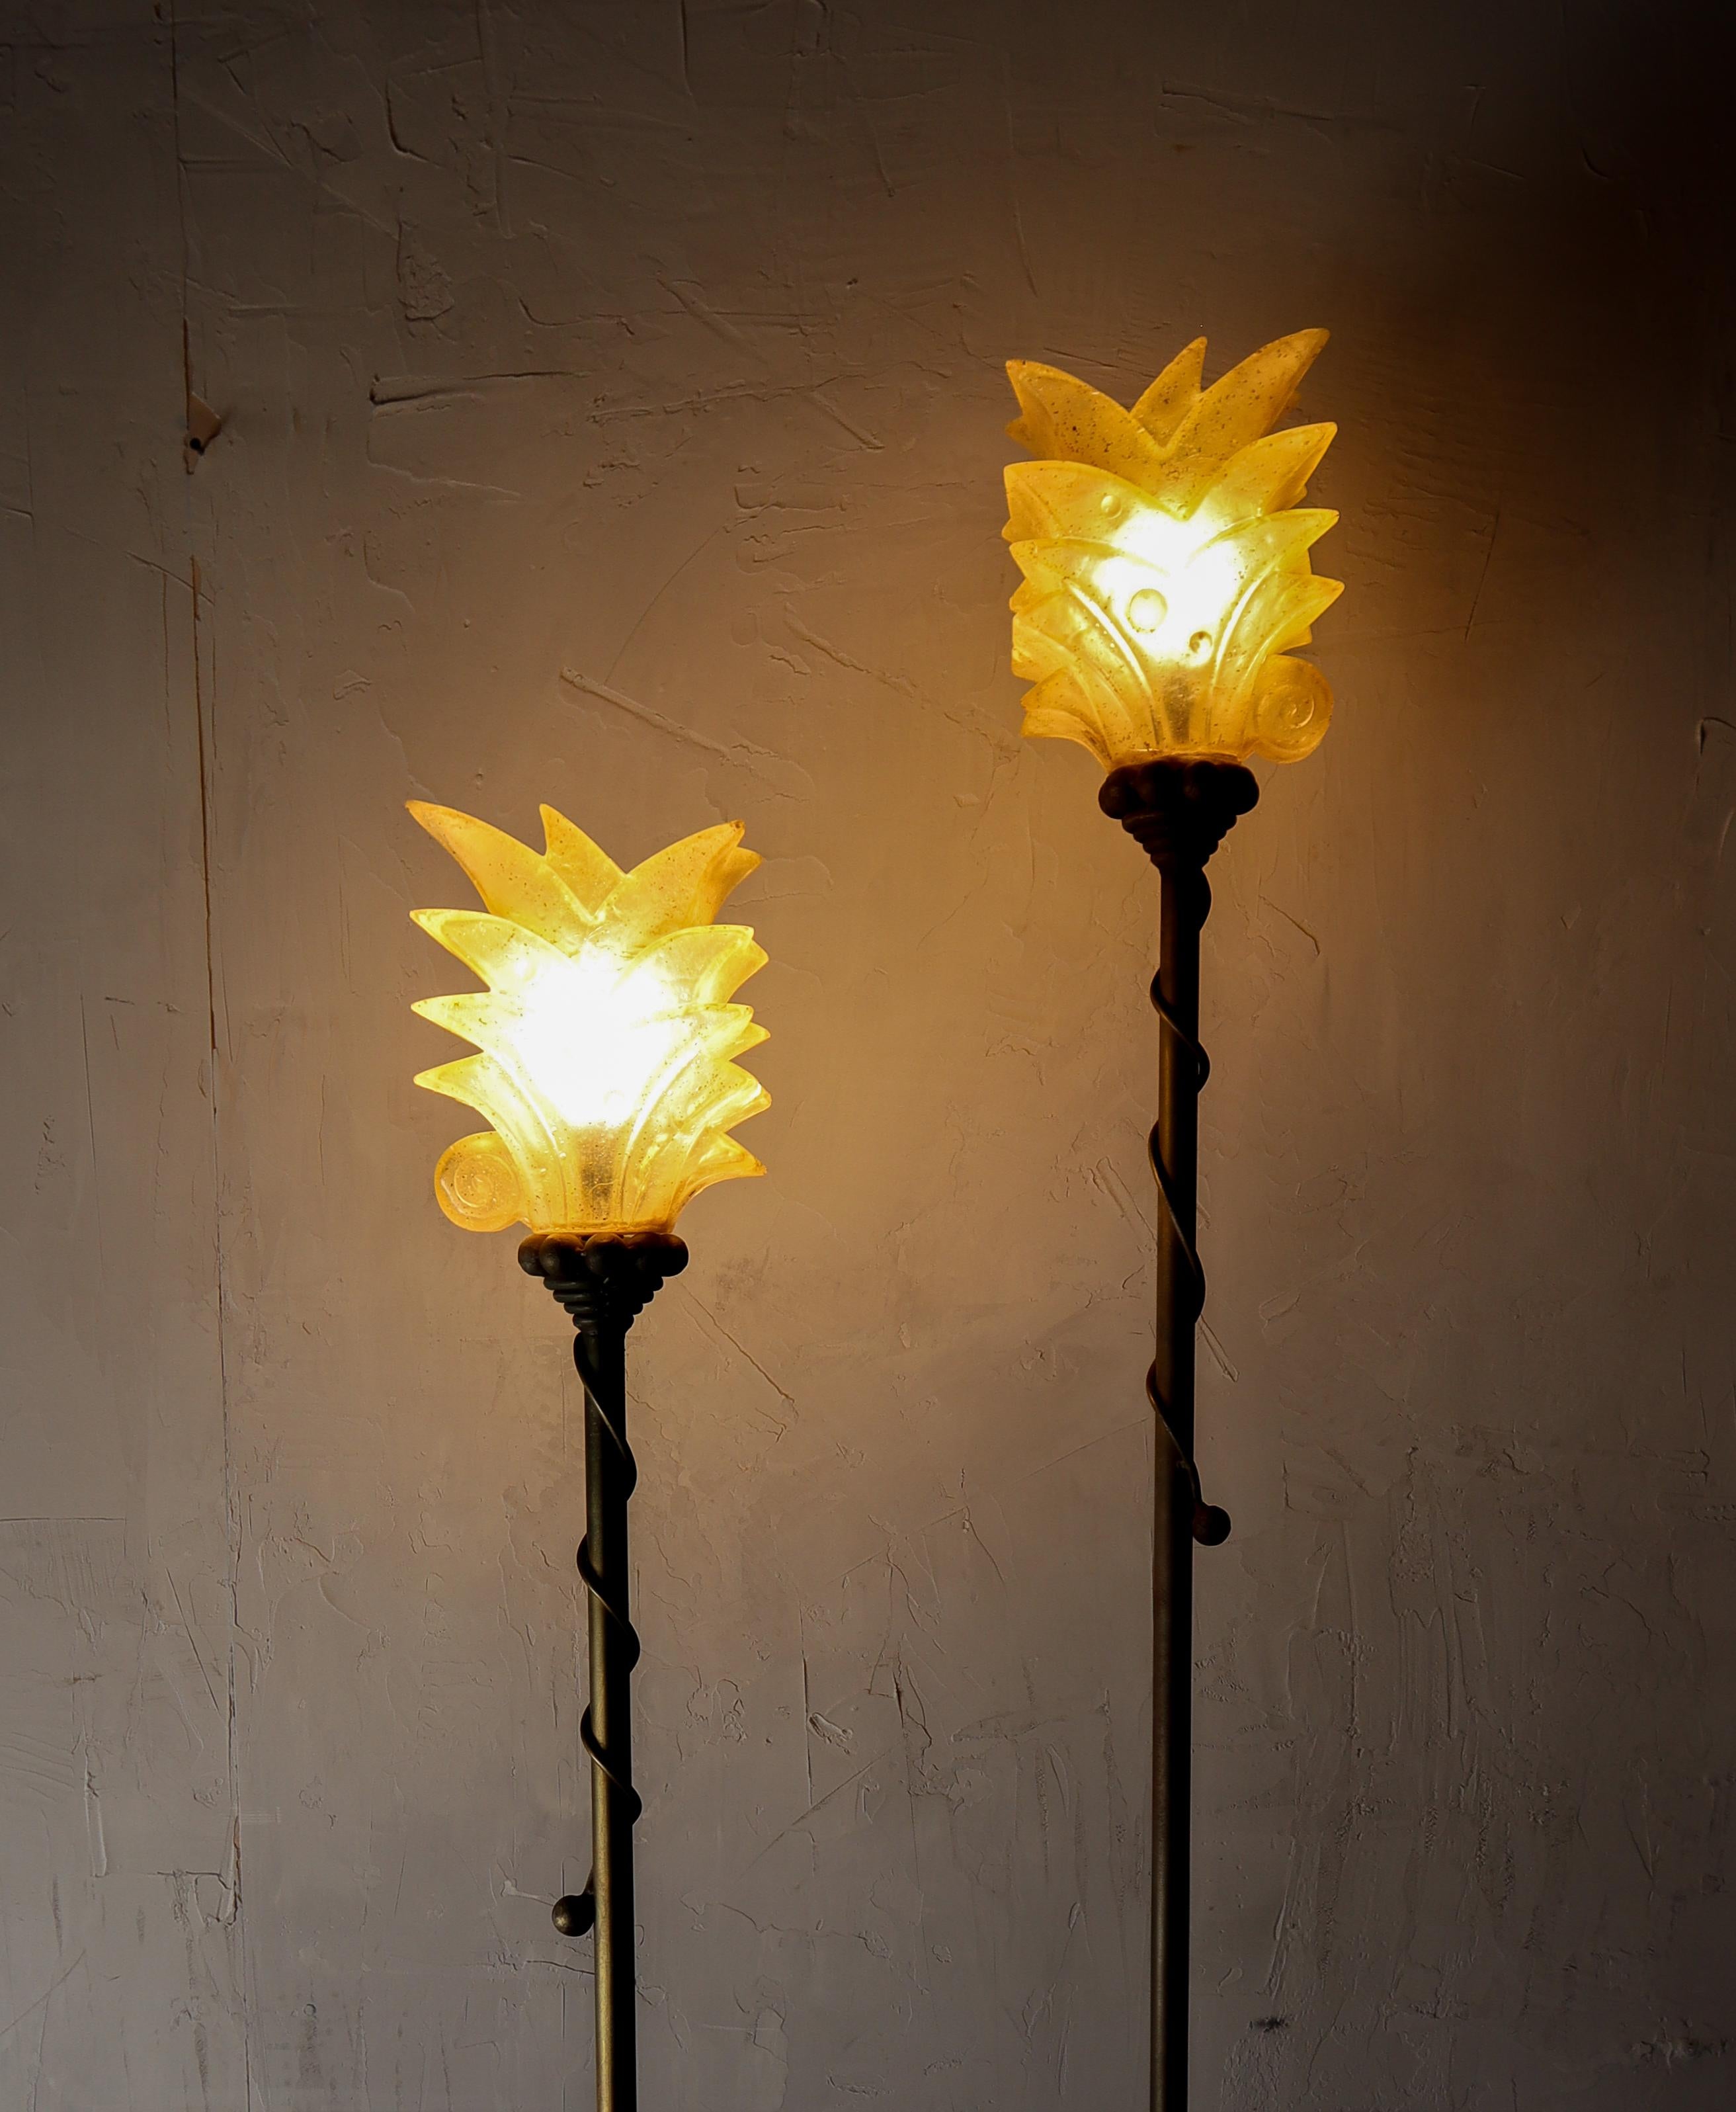 Steel Pair of Art Deco Styled Lamps by Carlos De Anda For Sale